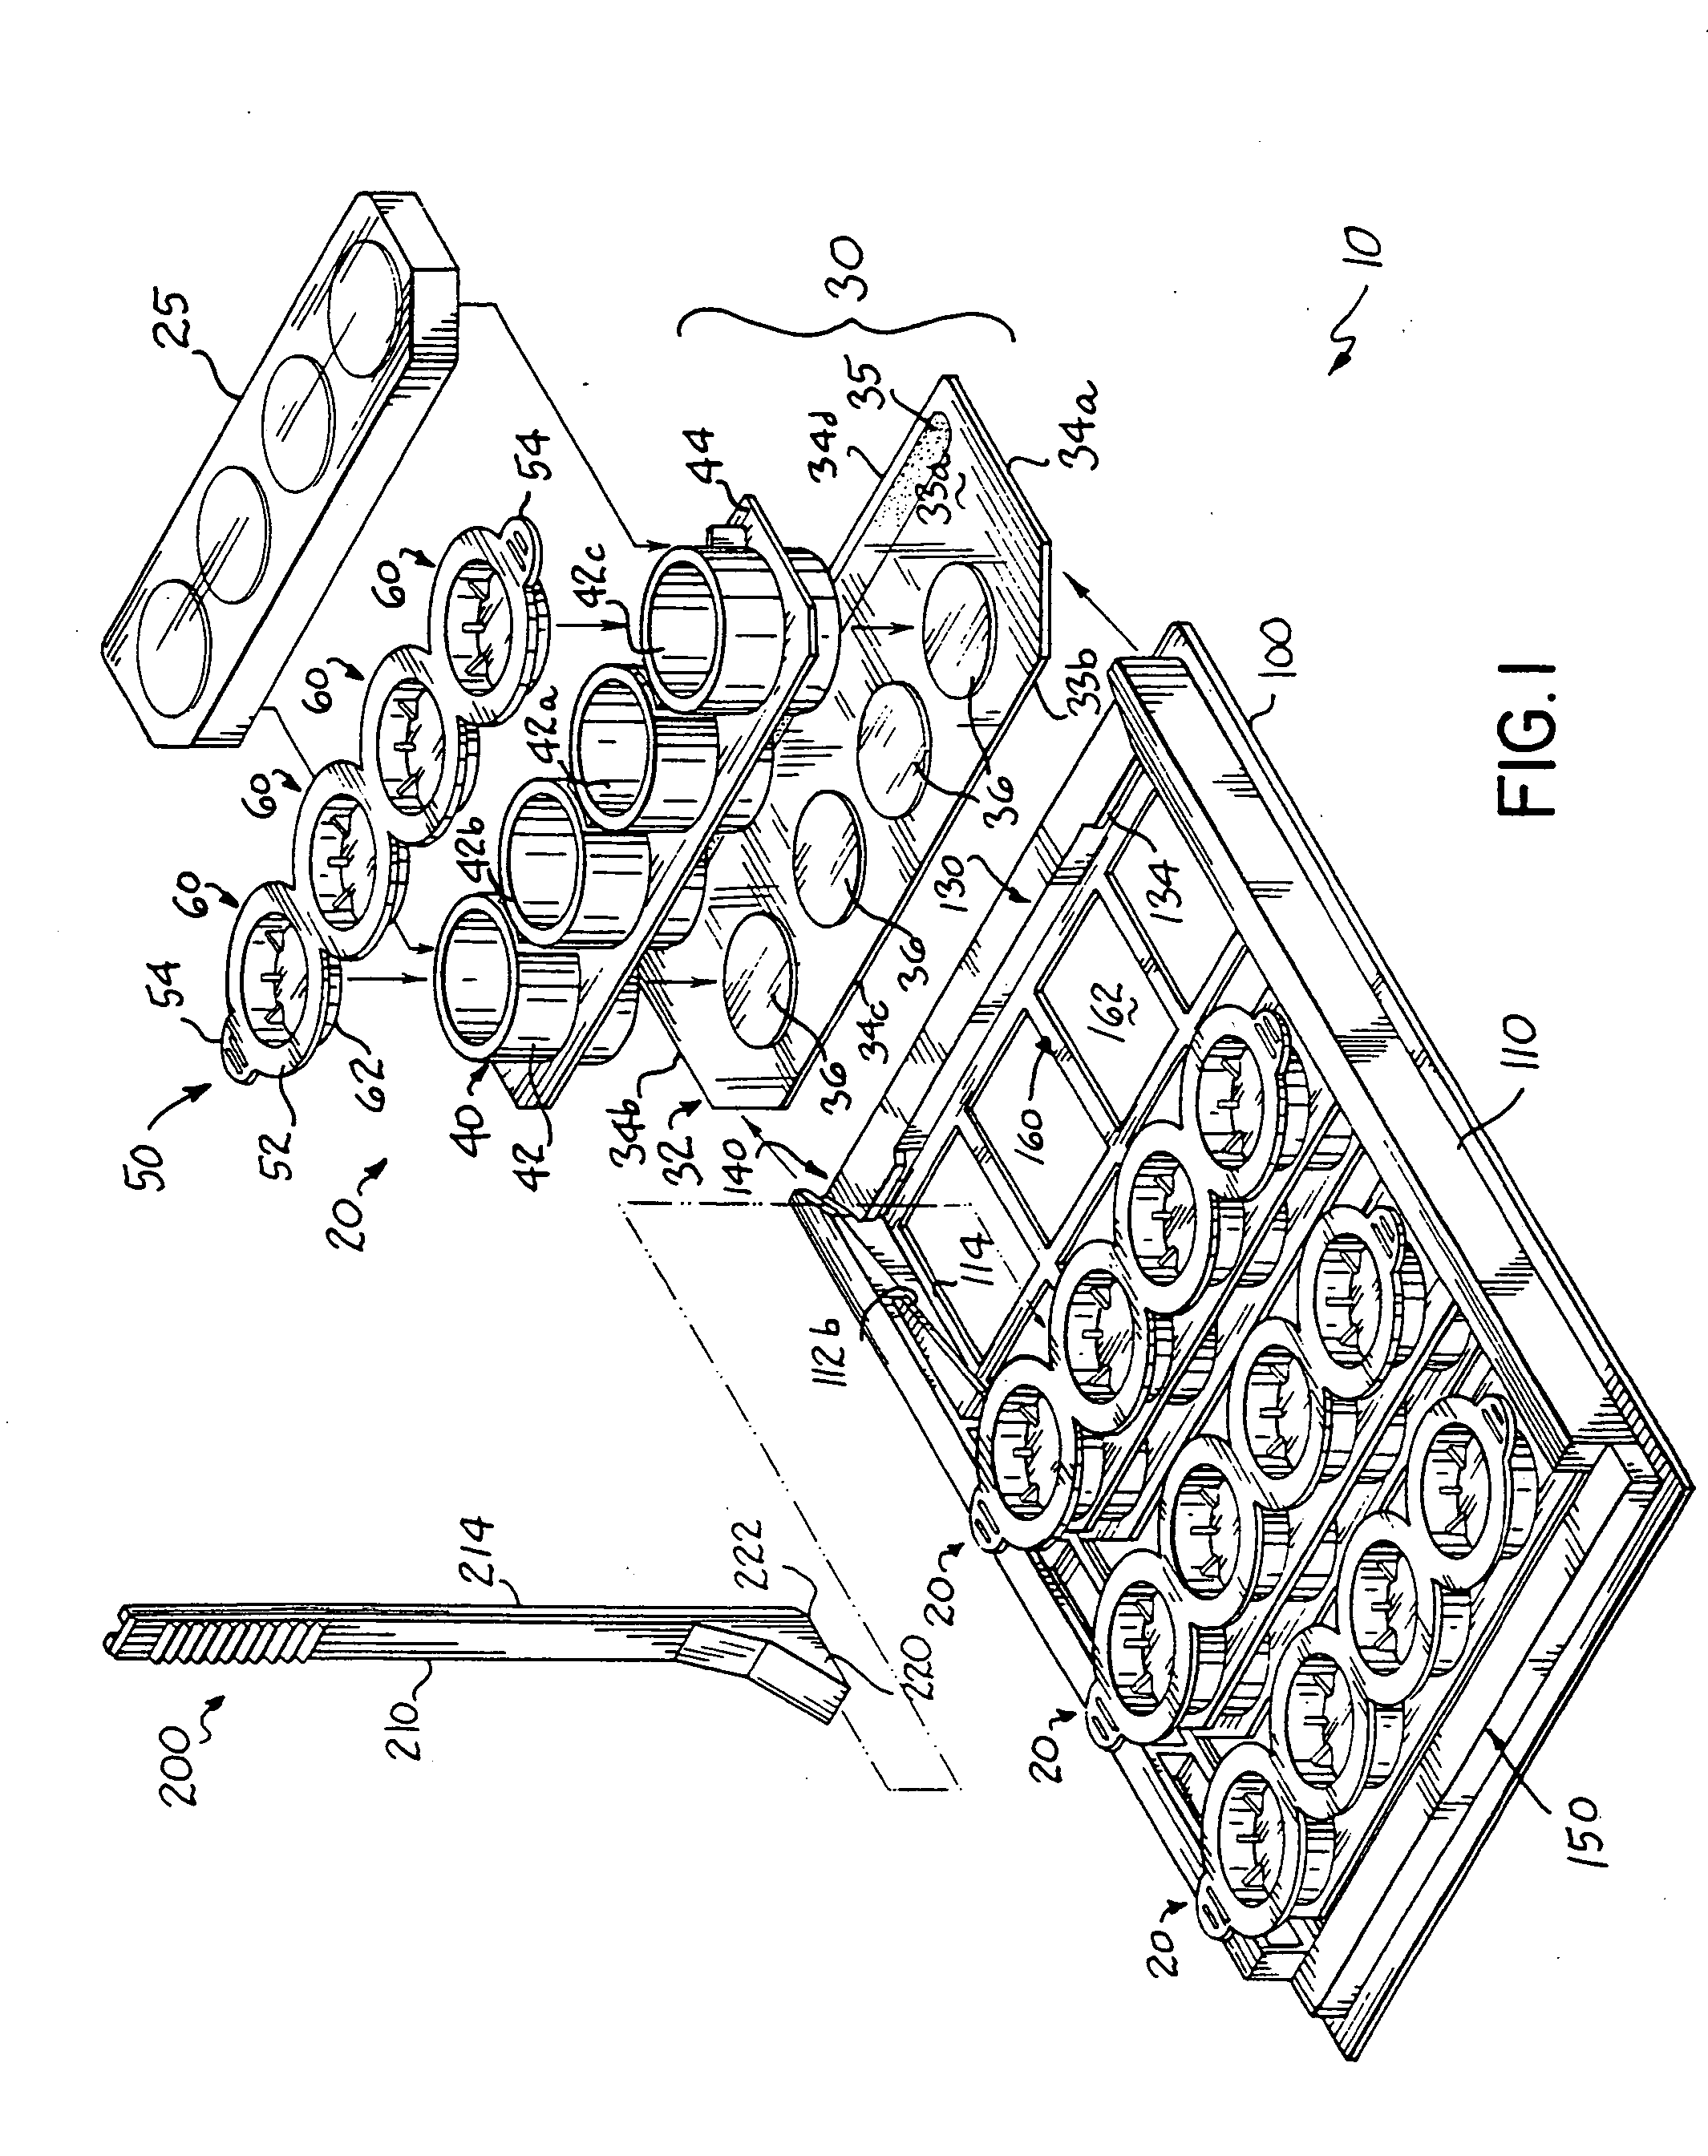 Multi-slide assembly including slide, frame and strip cap, and methods thereof